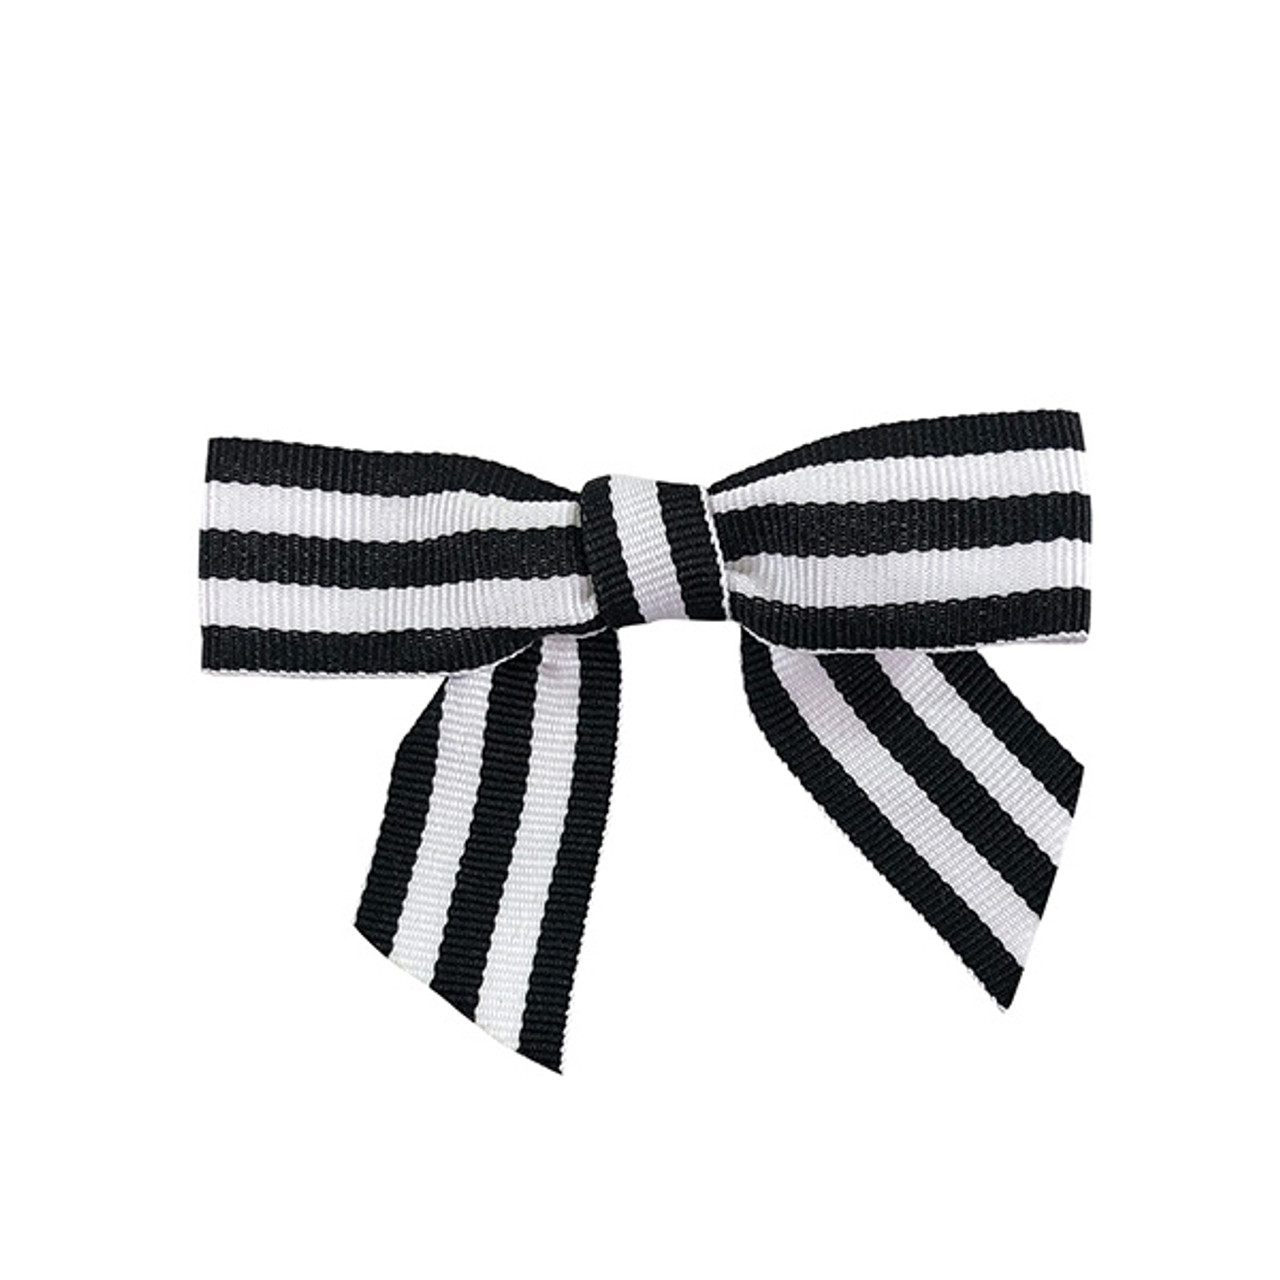 GINGHAM BLACK/WHITE Pre-tied Bow, 3.25” Bow, 5” Twist Tie, 7/8 Ribbon -  Pack of 50 Bows - Miss Cookie Packaging